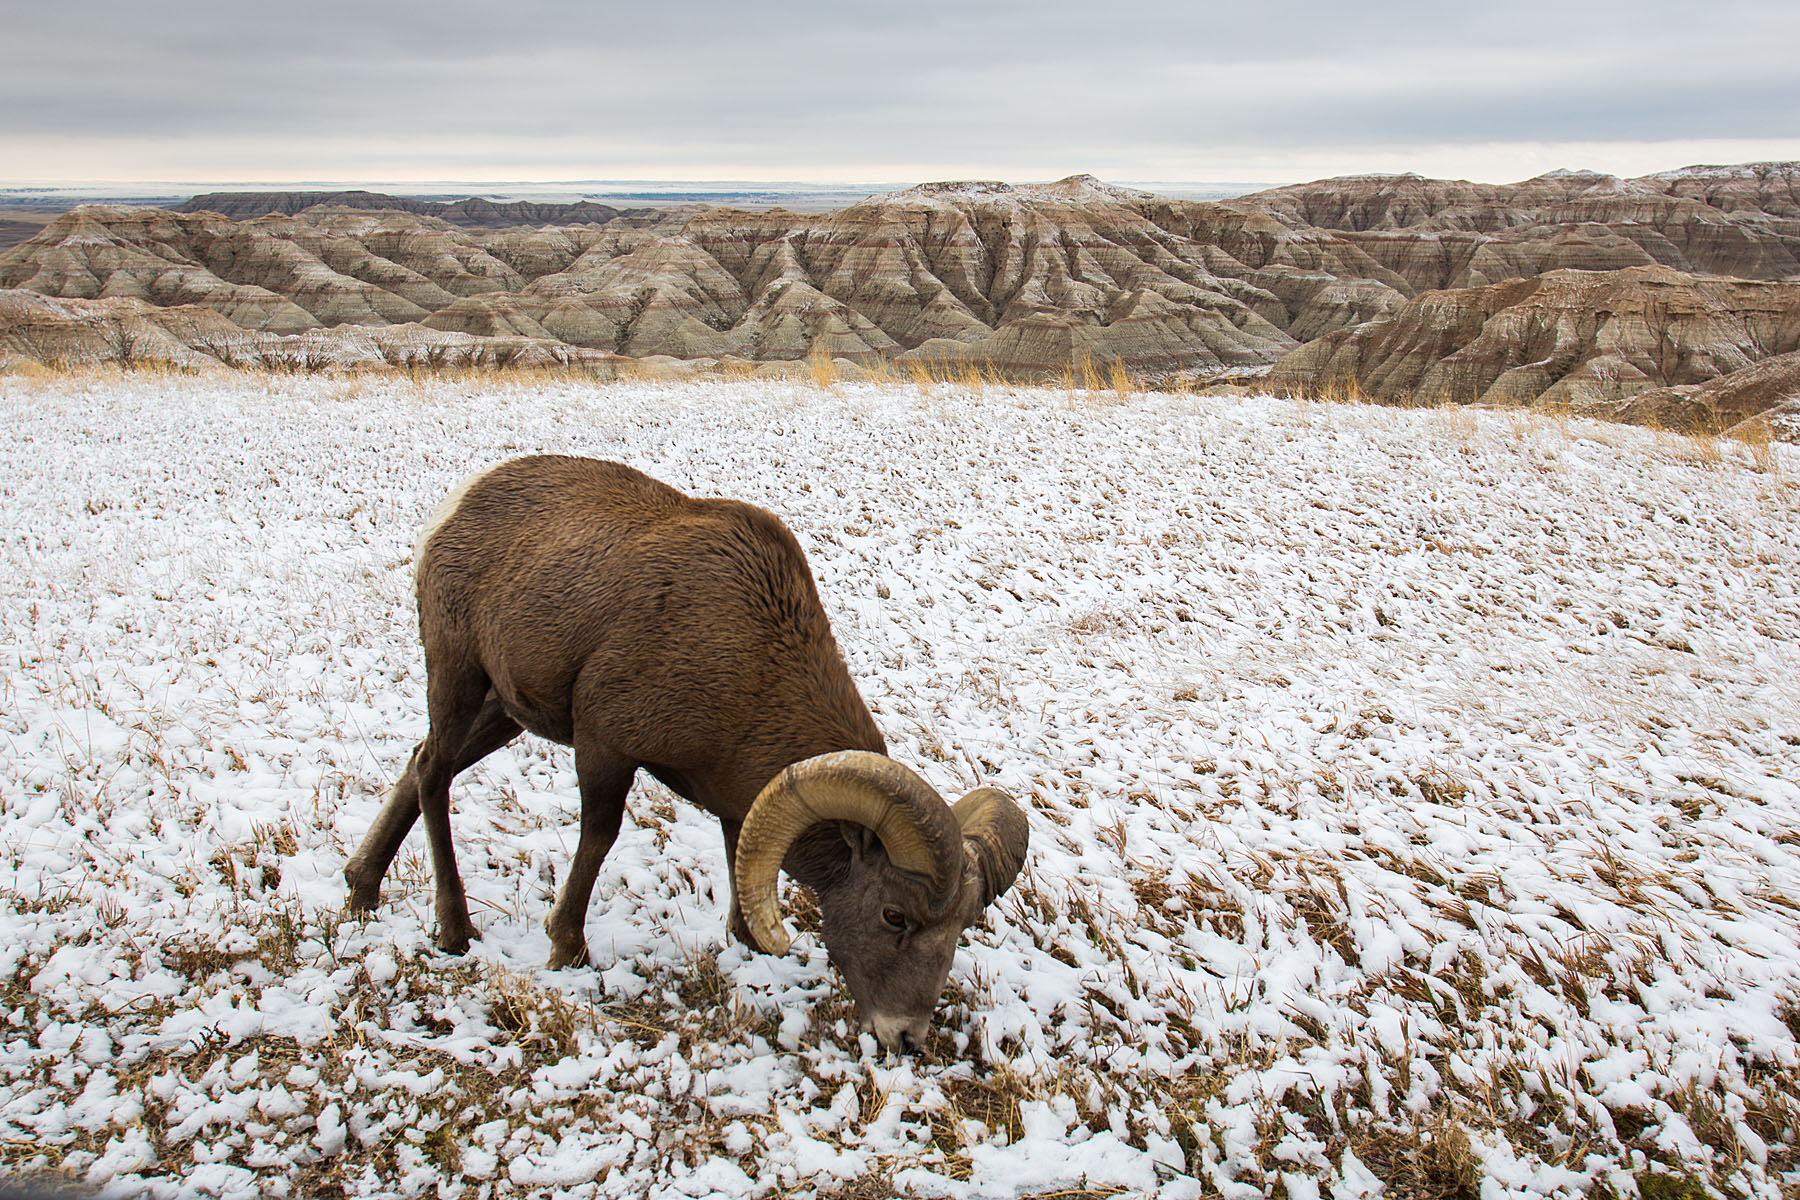 Bighorn sheep in South Dakota Badlands after an October snow.  I was on the wrong side of the car so I passed the camera to my future spouse Sue, who took this shot.  Click for next photo.